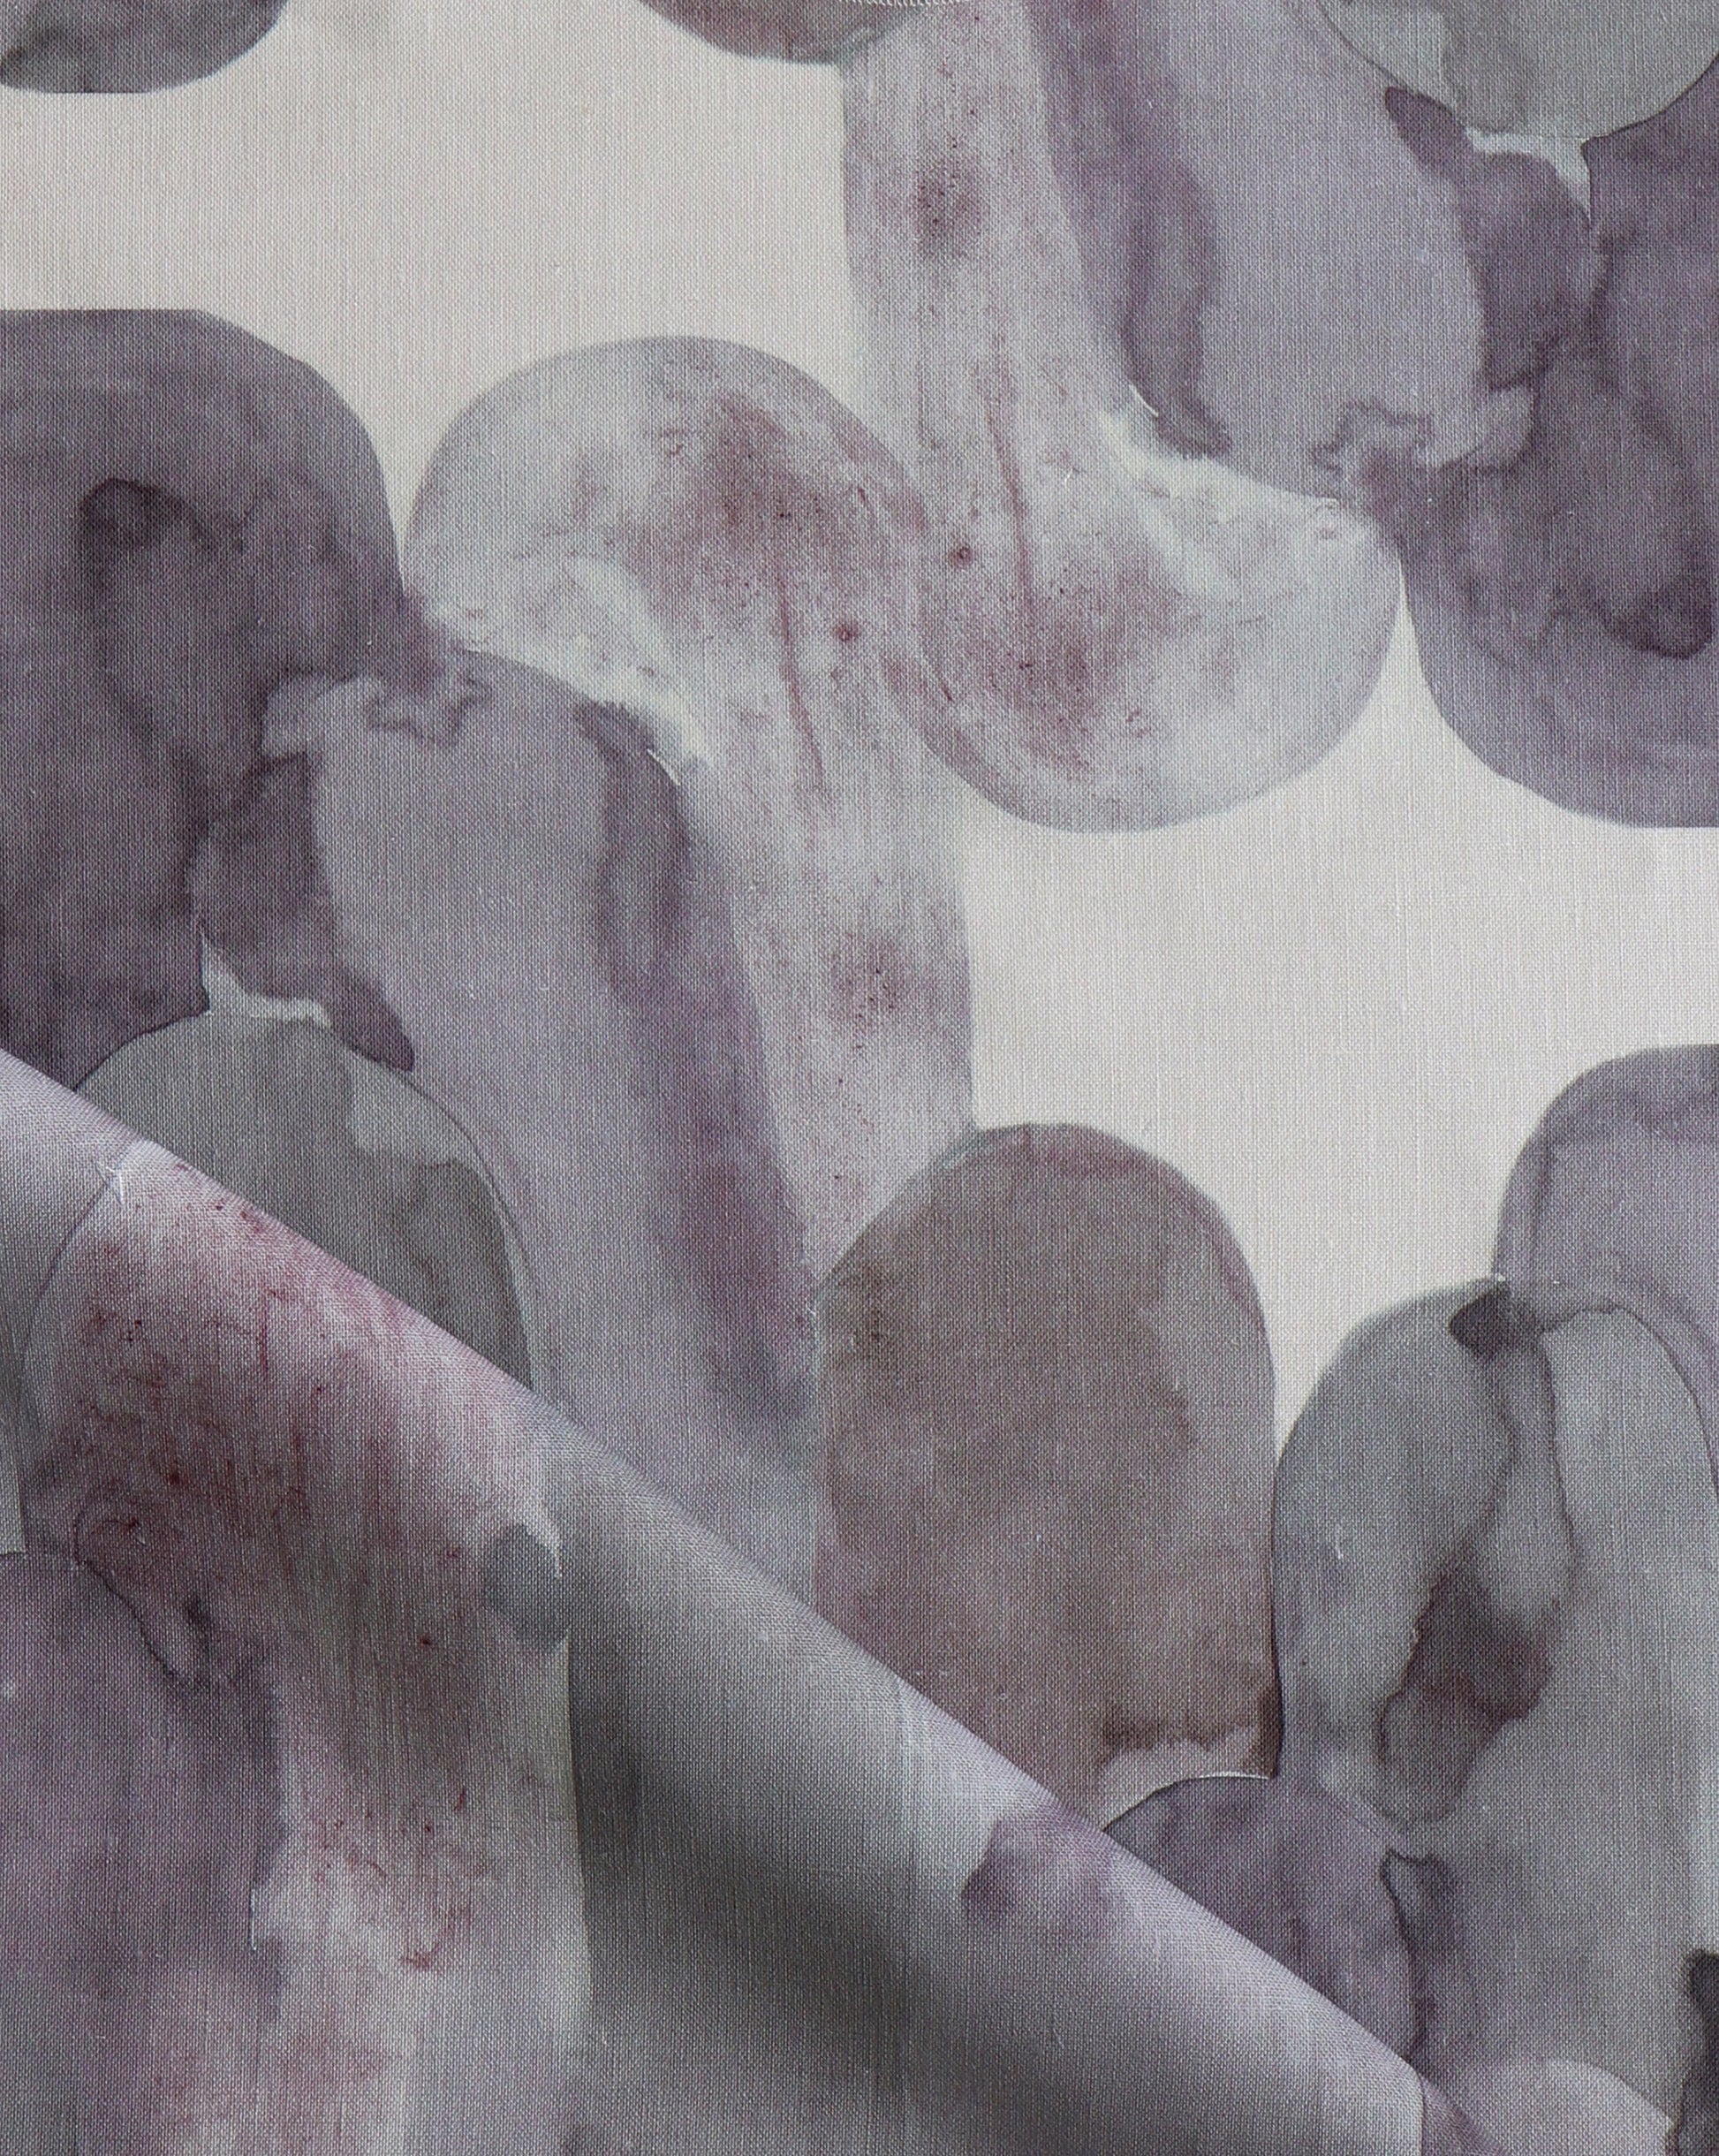 Luxurious Acros fabric in Pomegranate introduces magentas and greys into a soft geometric pattern of curves and columns